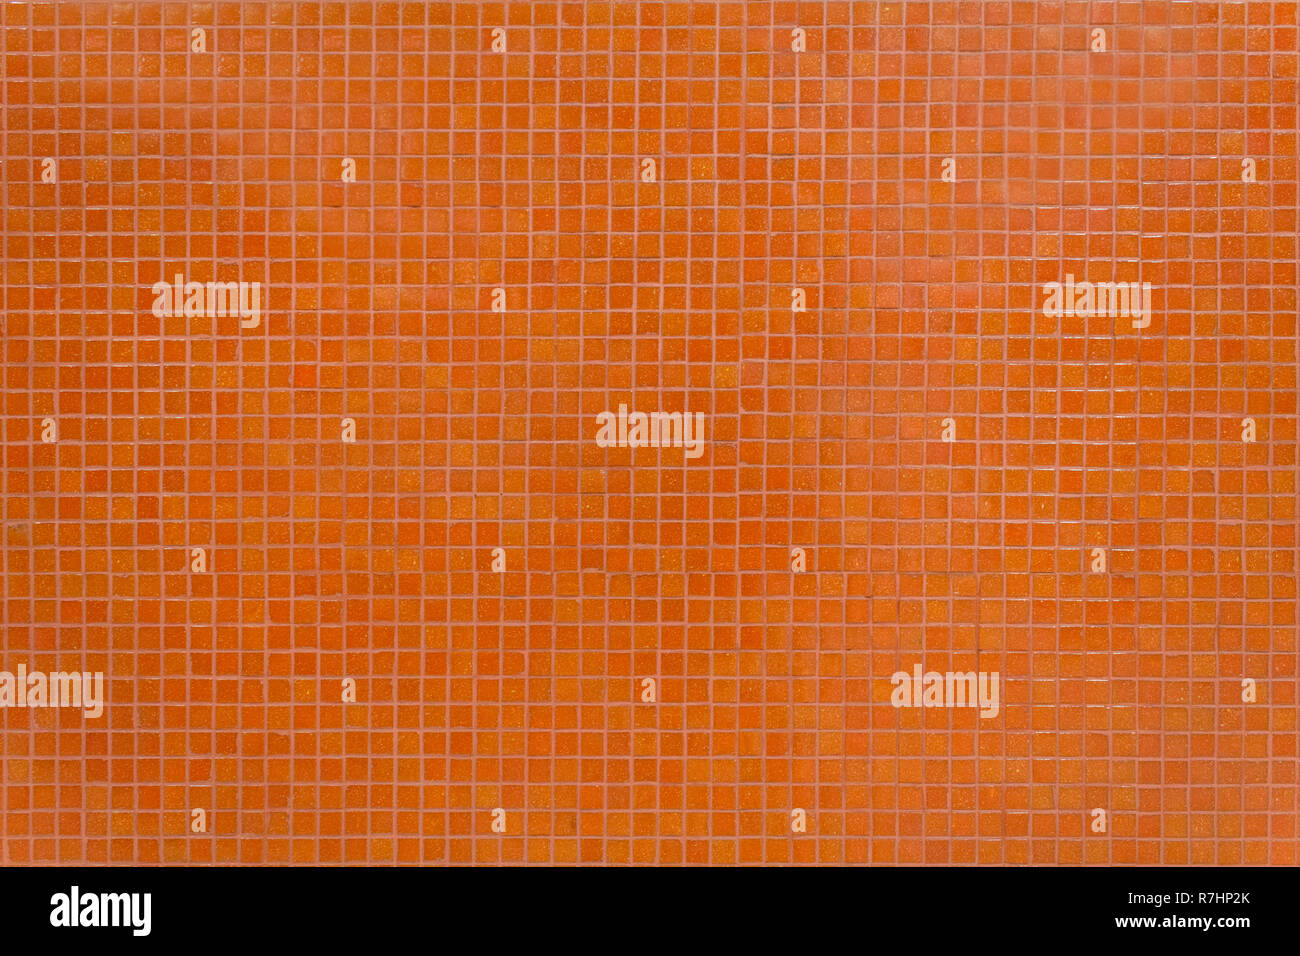 Wall orange tiles with little mosaic squares. Stock Photo